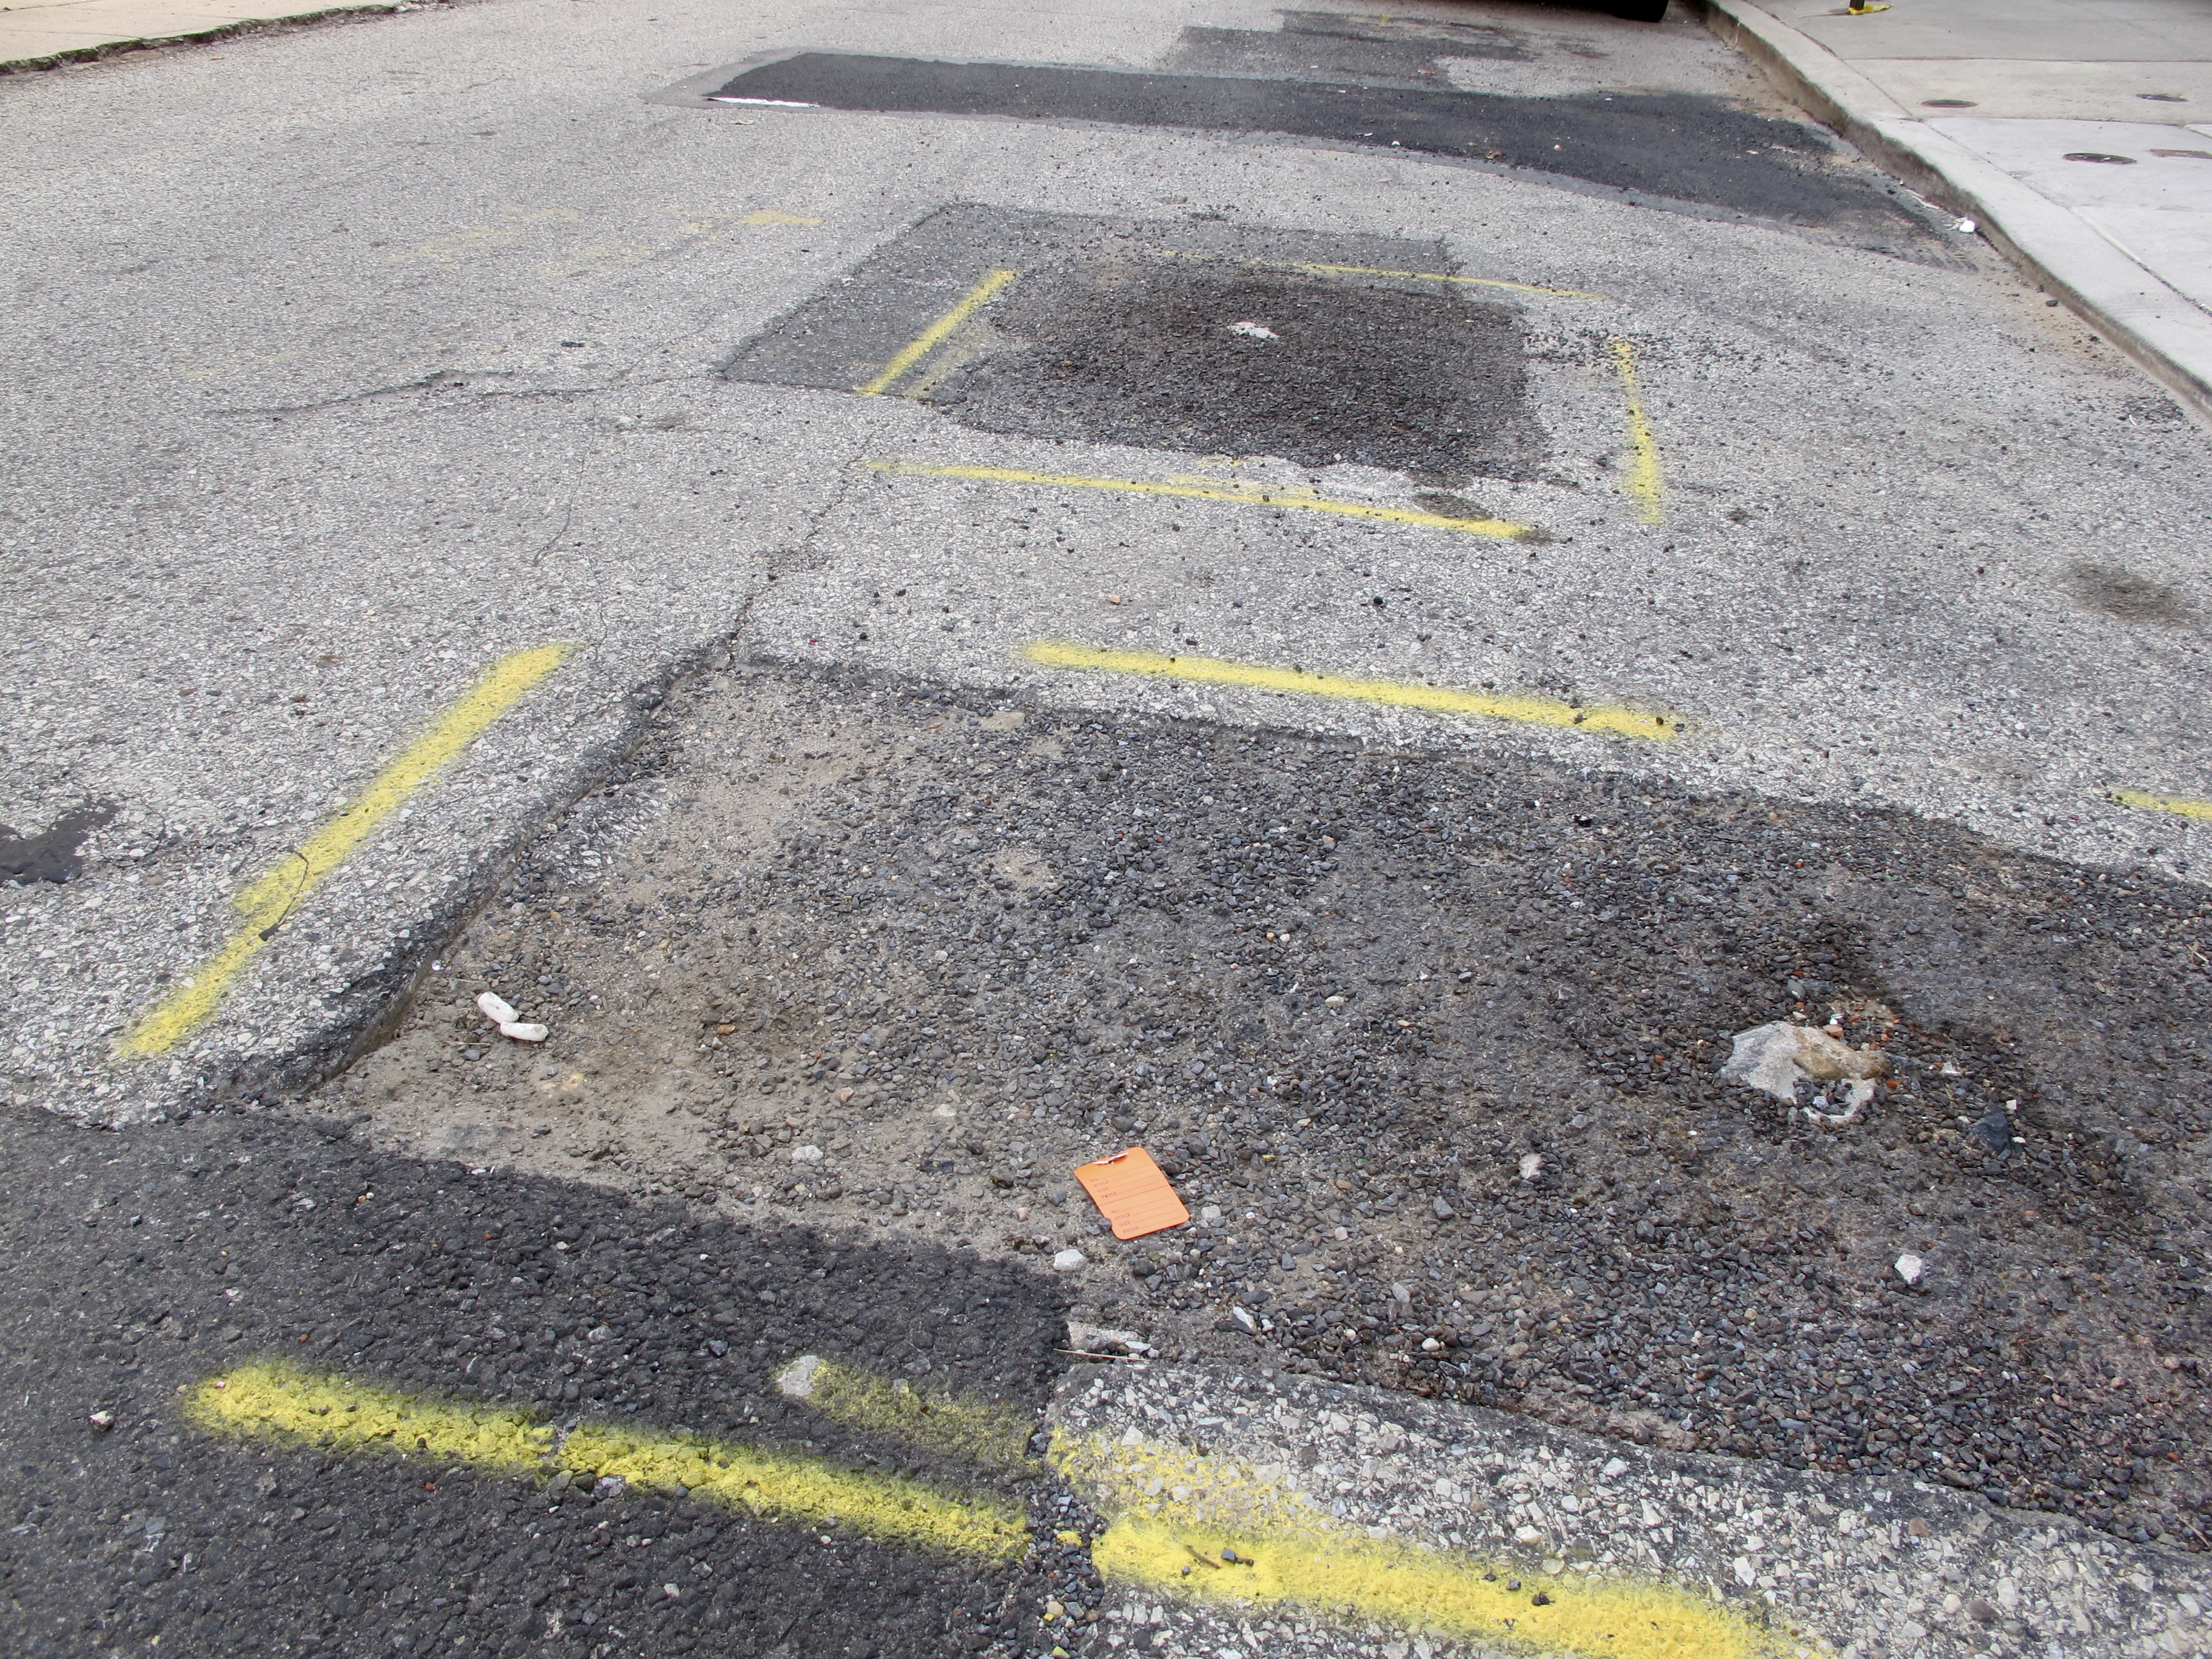 Ditches are not potholes according to the Streets Department's categorization of road defects.